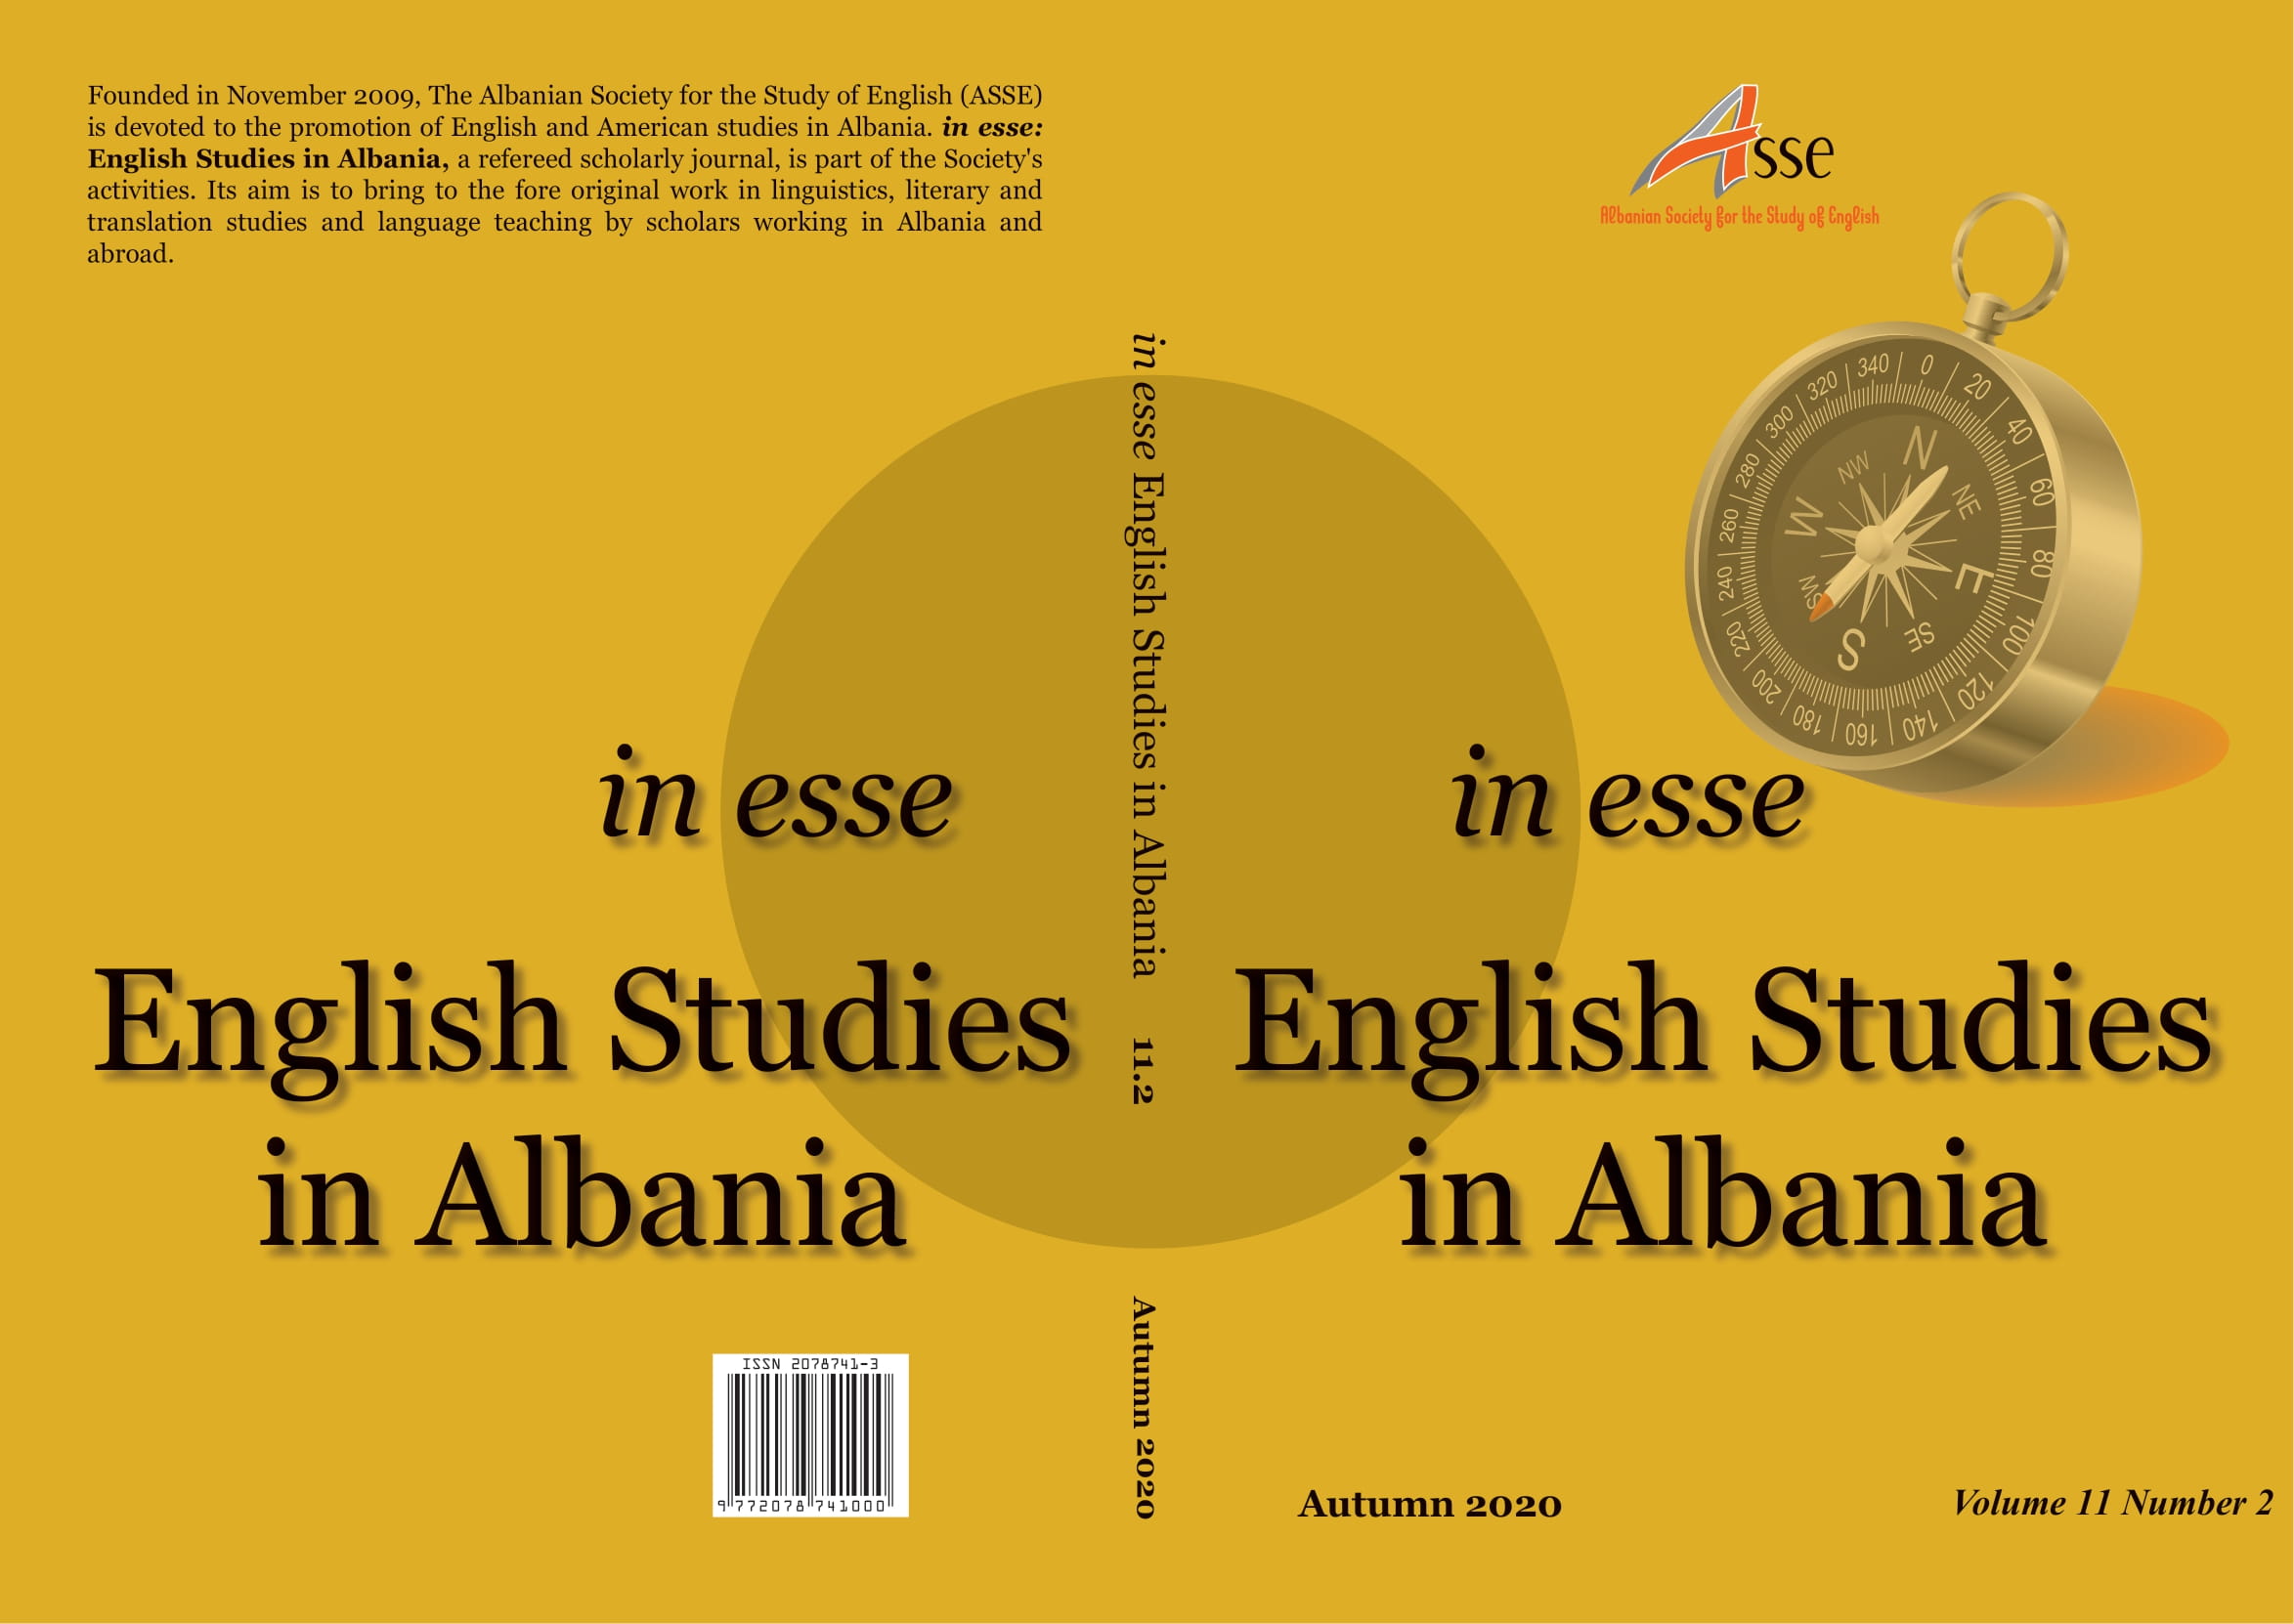 Noli’s contribution to enriching the Albanian language, literature and culture Cover Image